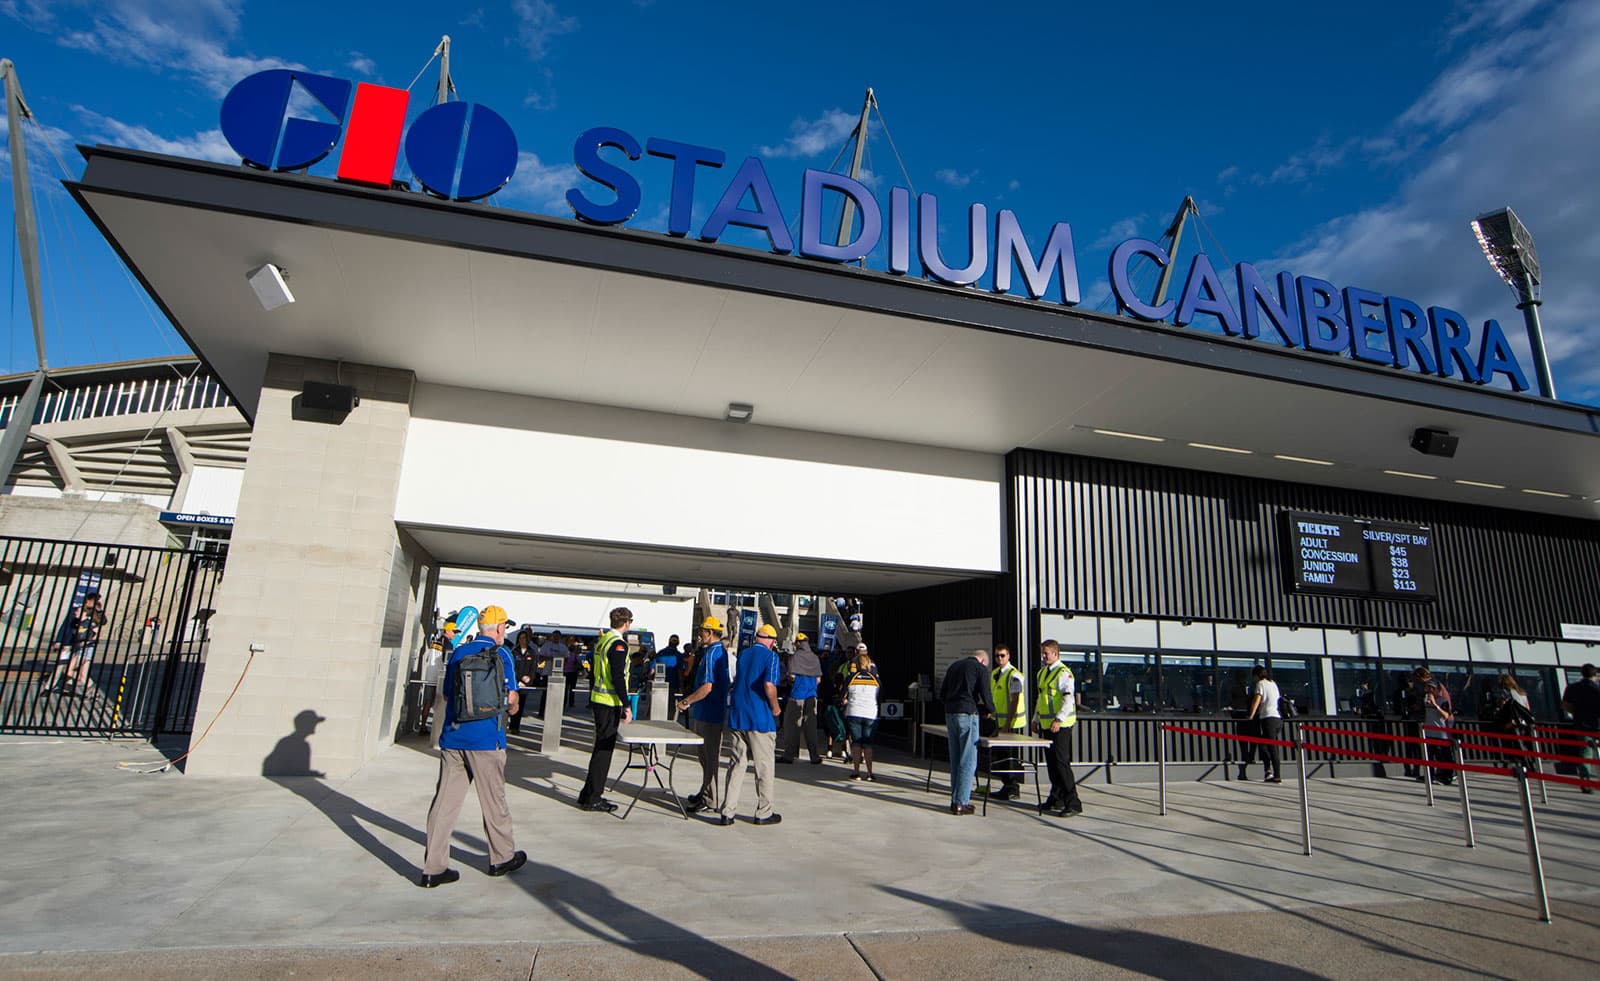 Entrance to GIO stadium in Canberra